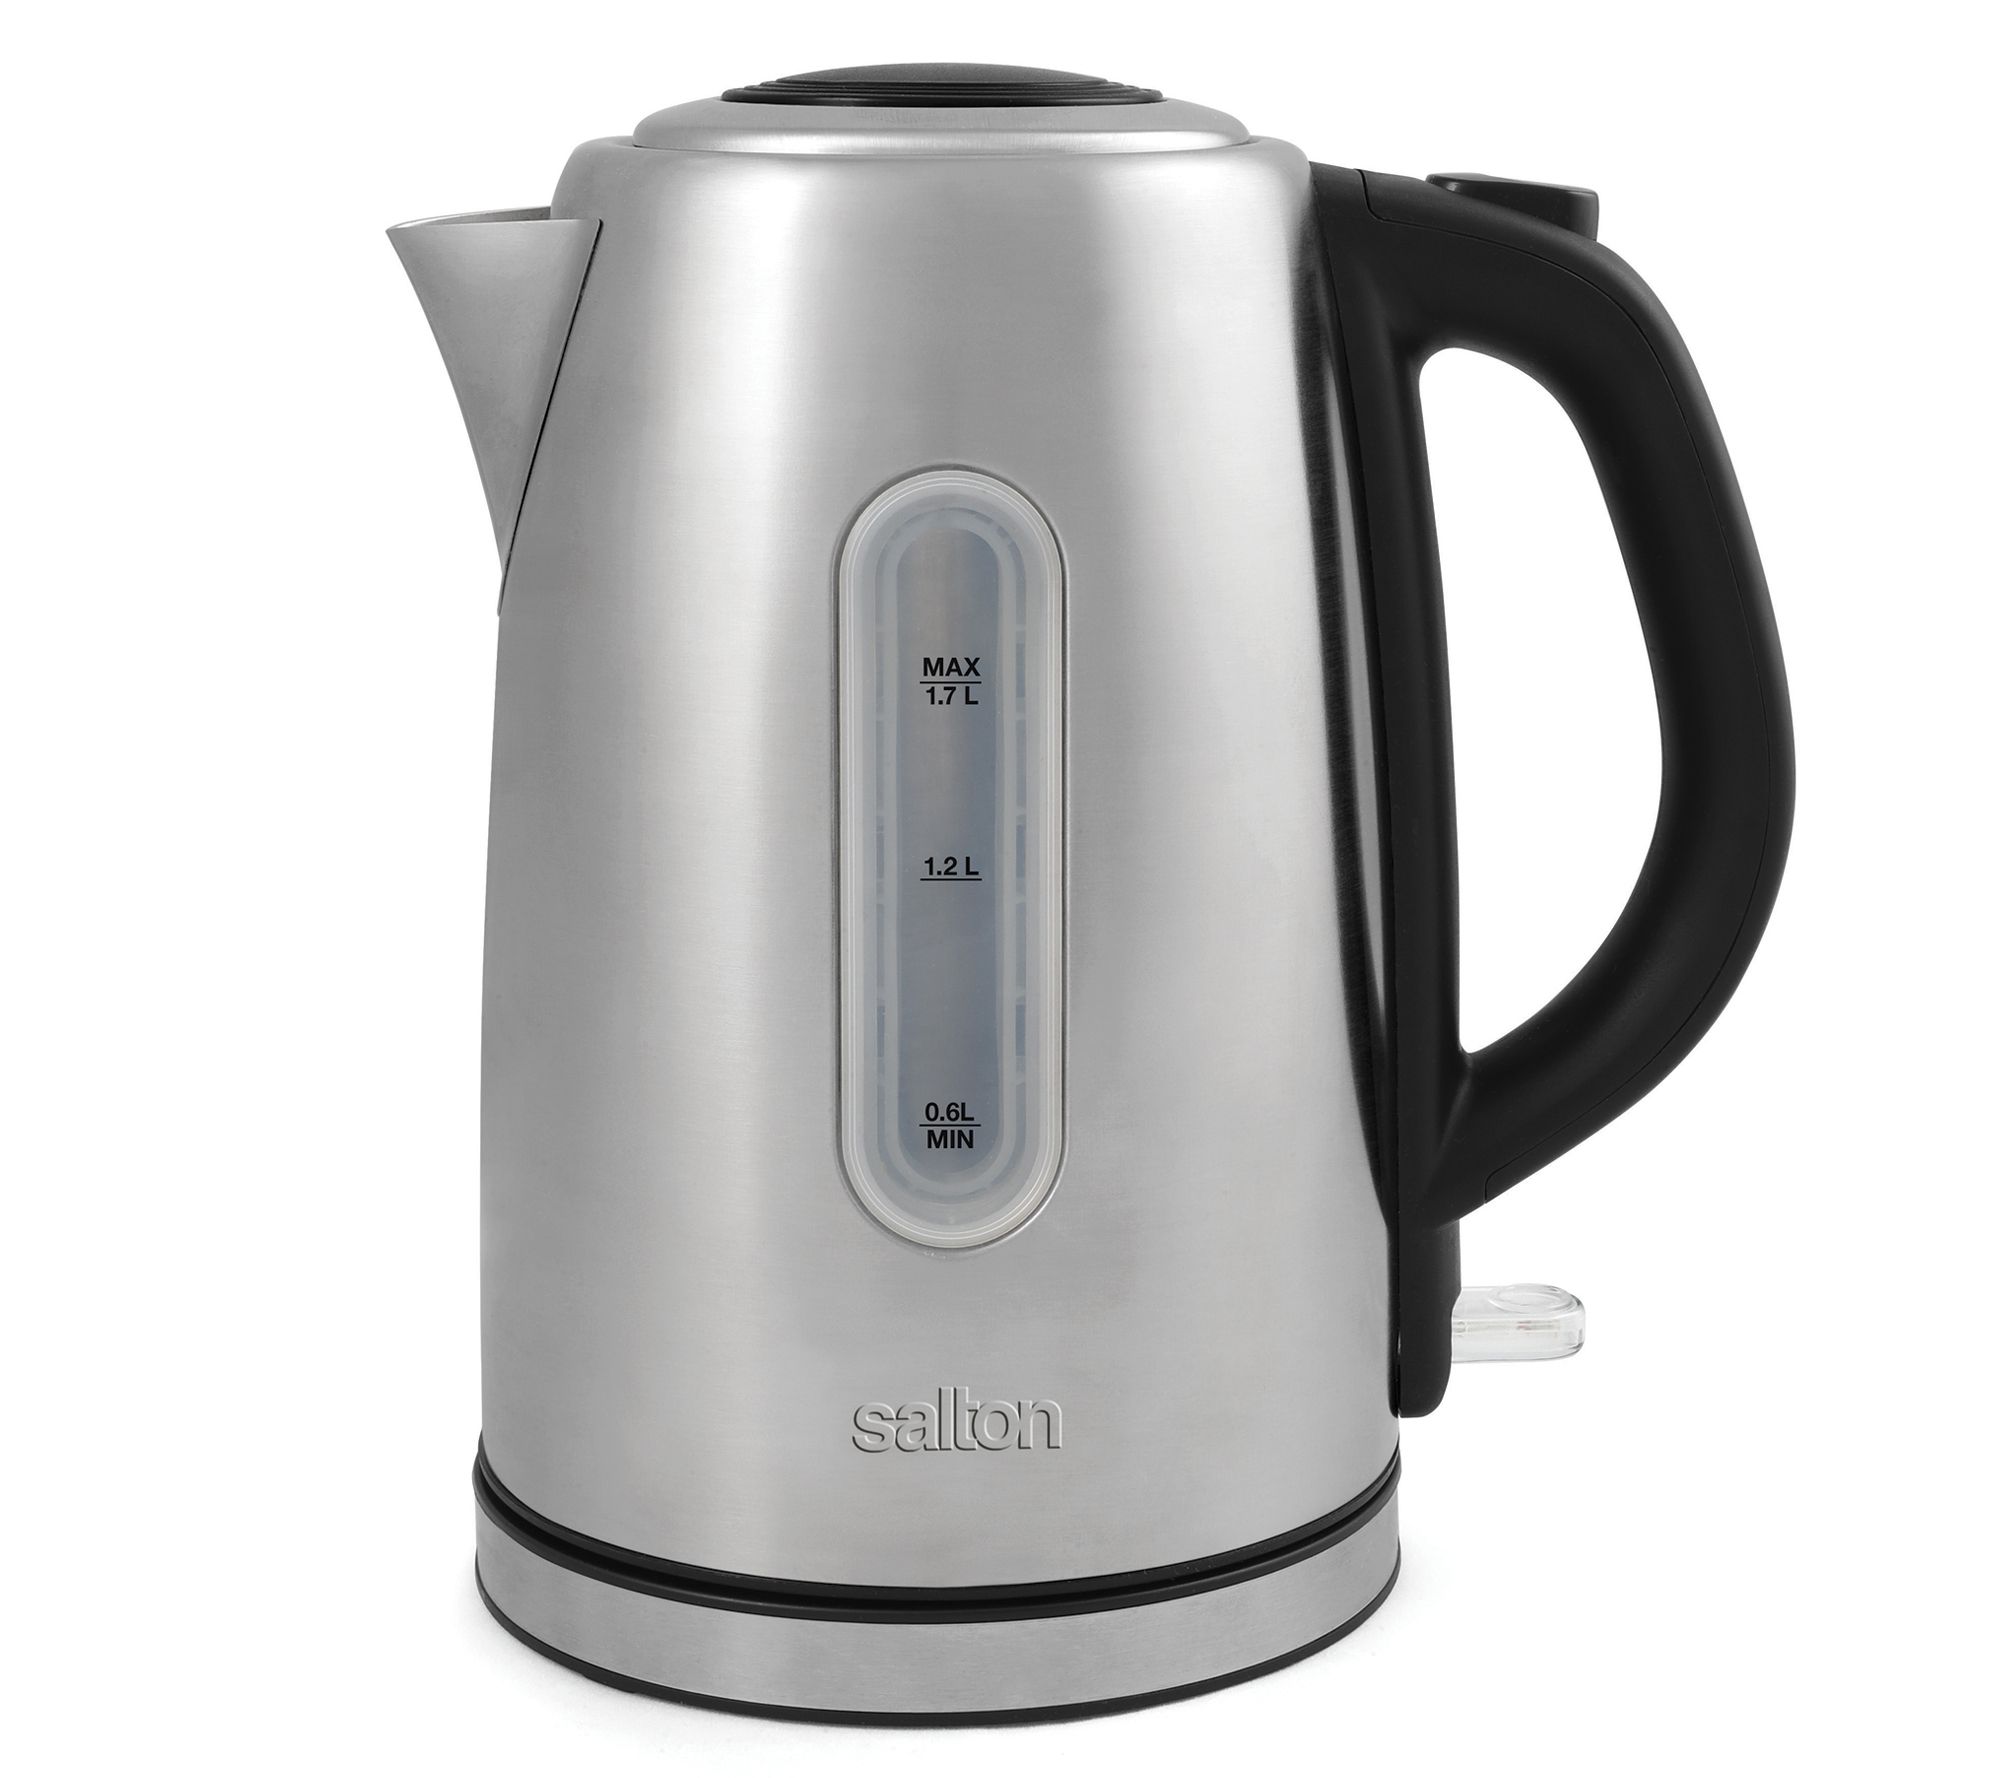 Courant 1.7 Liter Cordless Electric Kettle - White